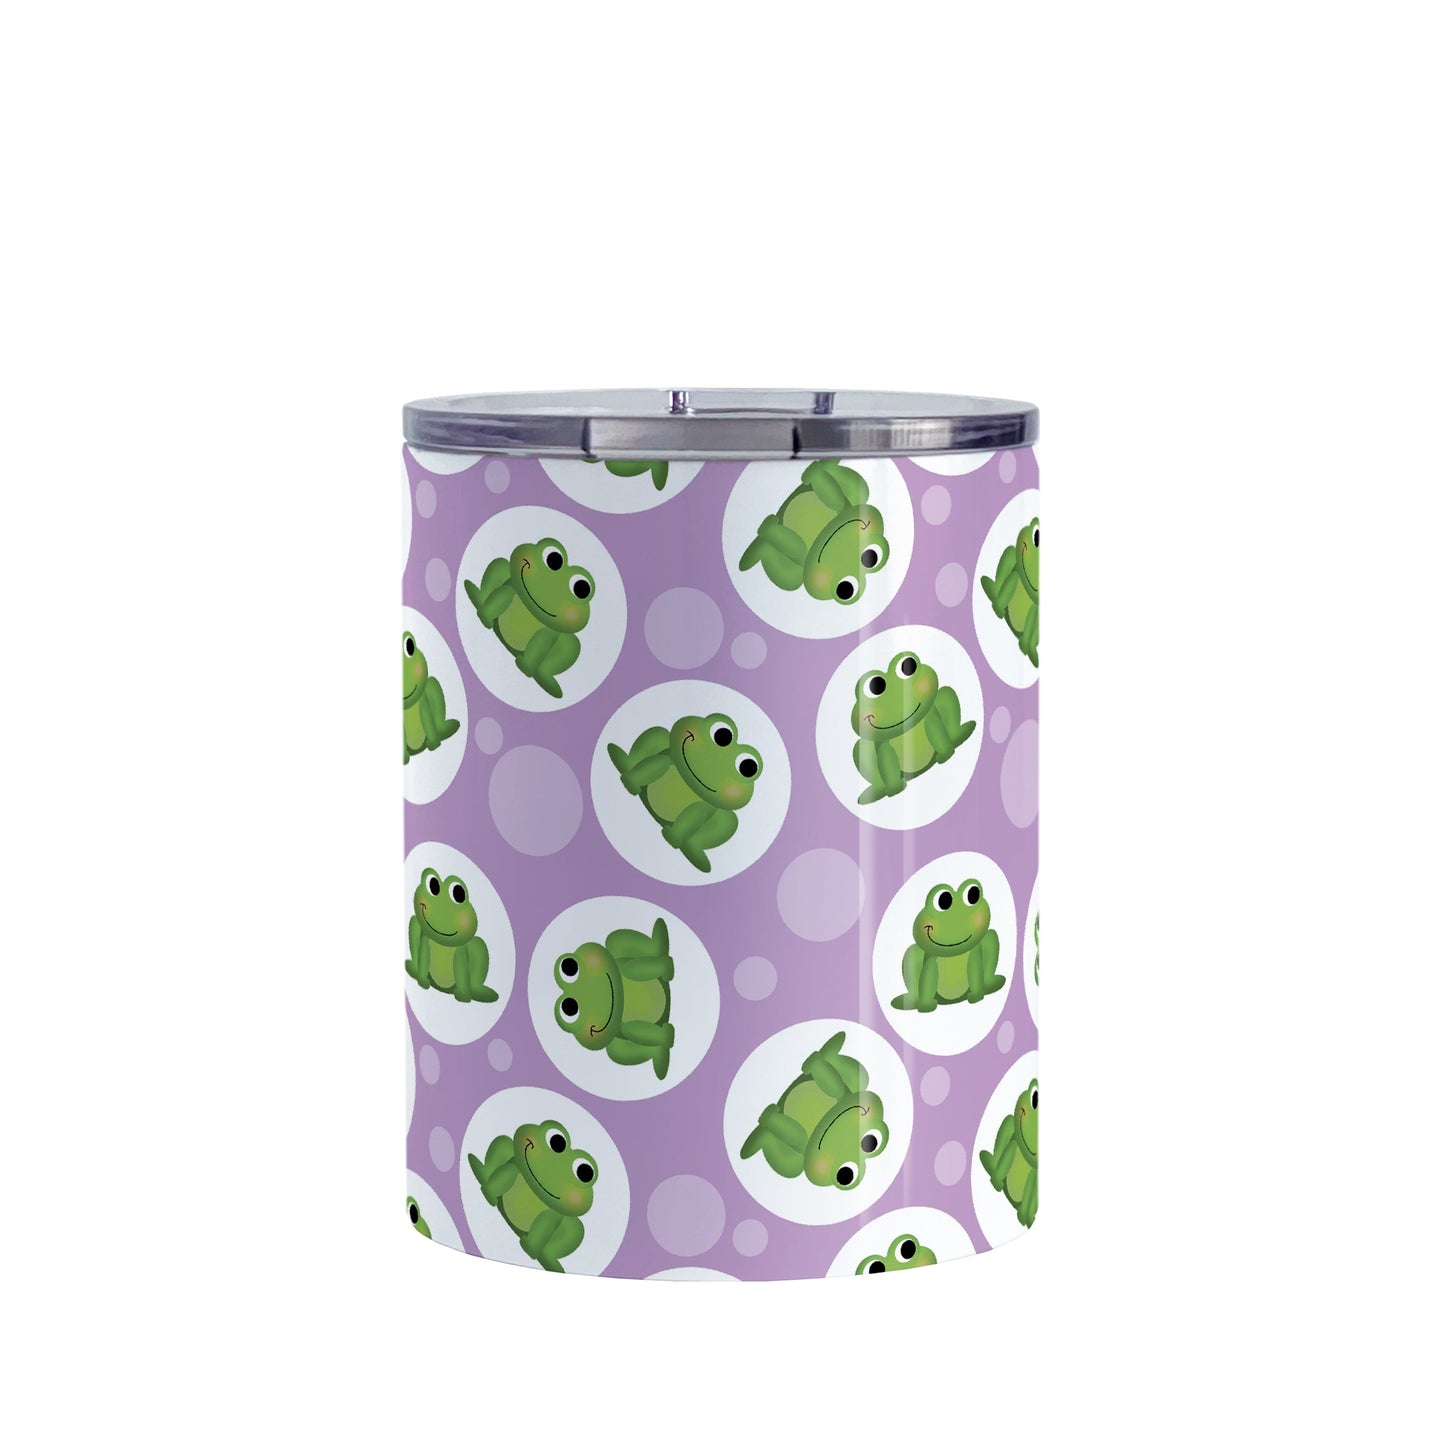 Cute Purple Frog Pattern Tumbler Cup (10oz, stainless steel insulated) at Amy's Coffee Mugs